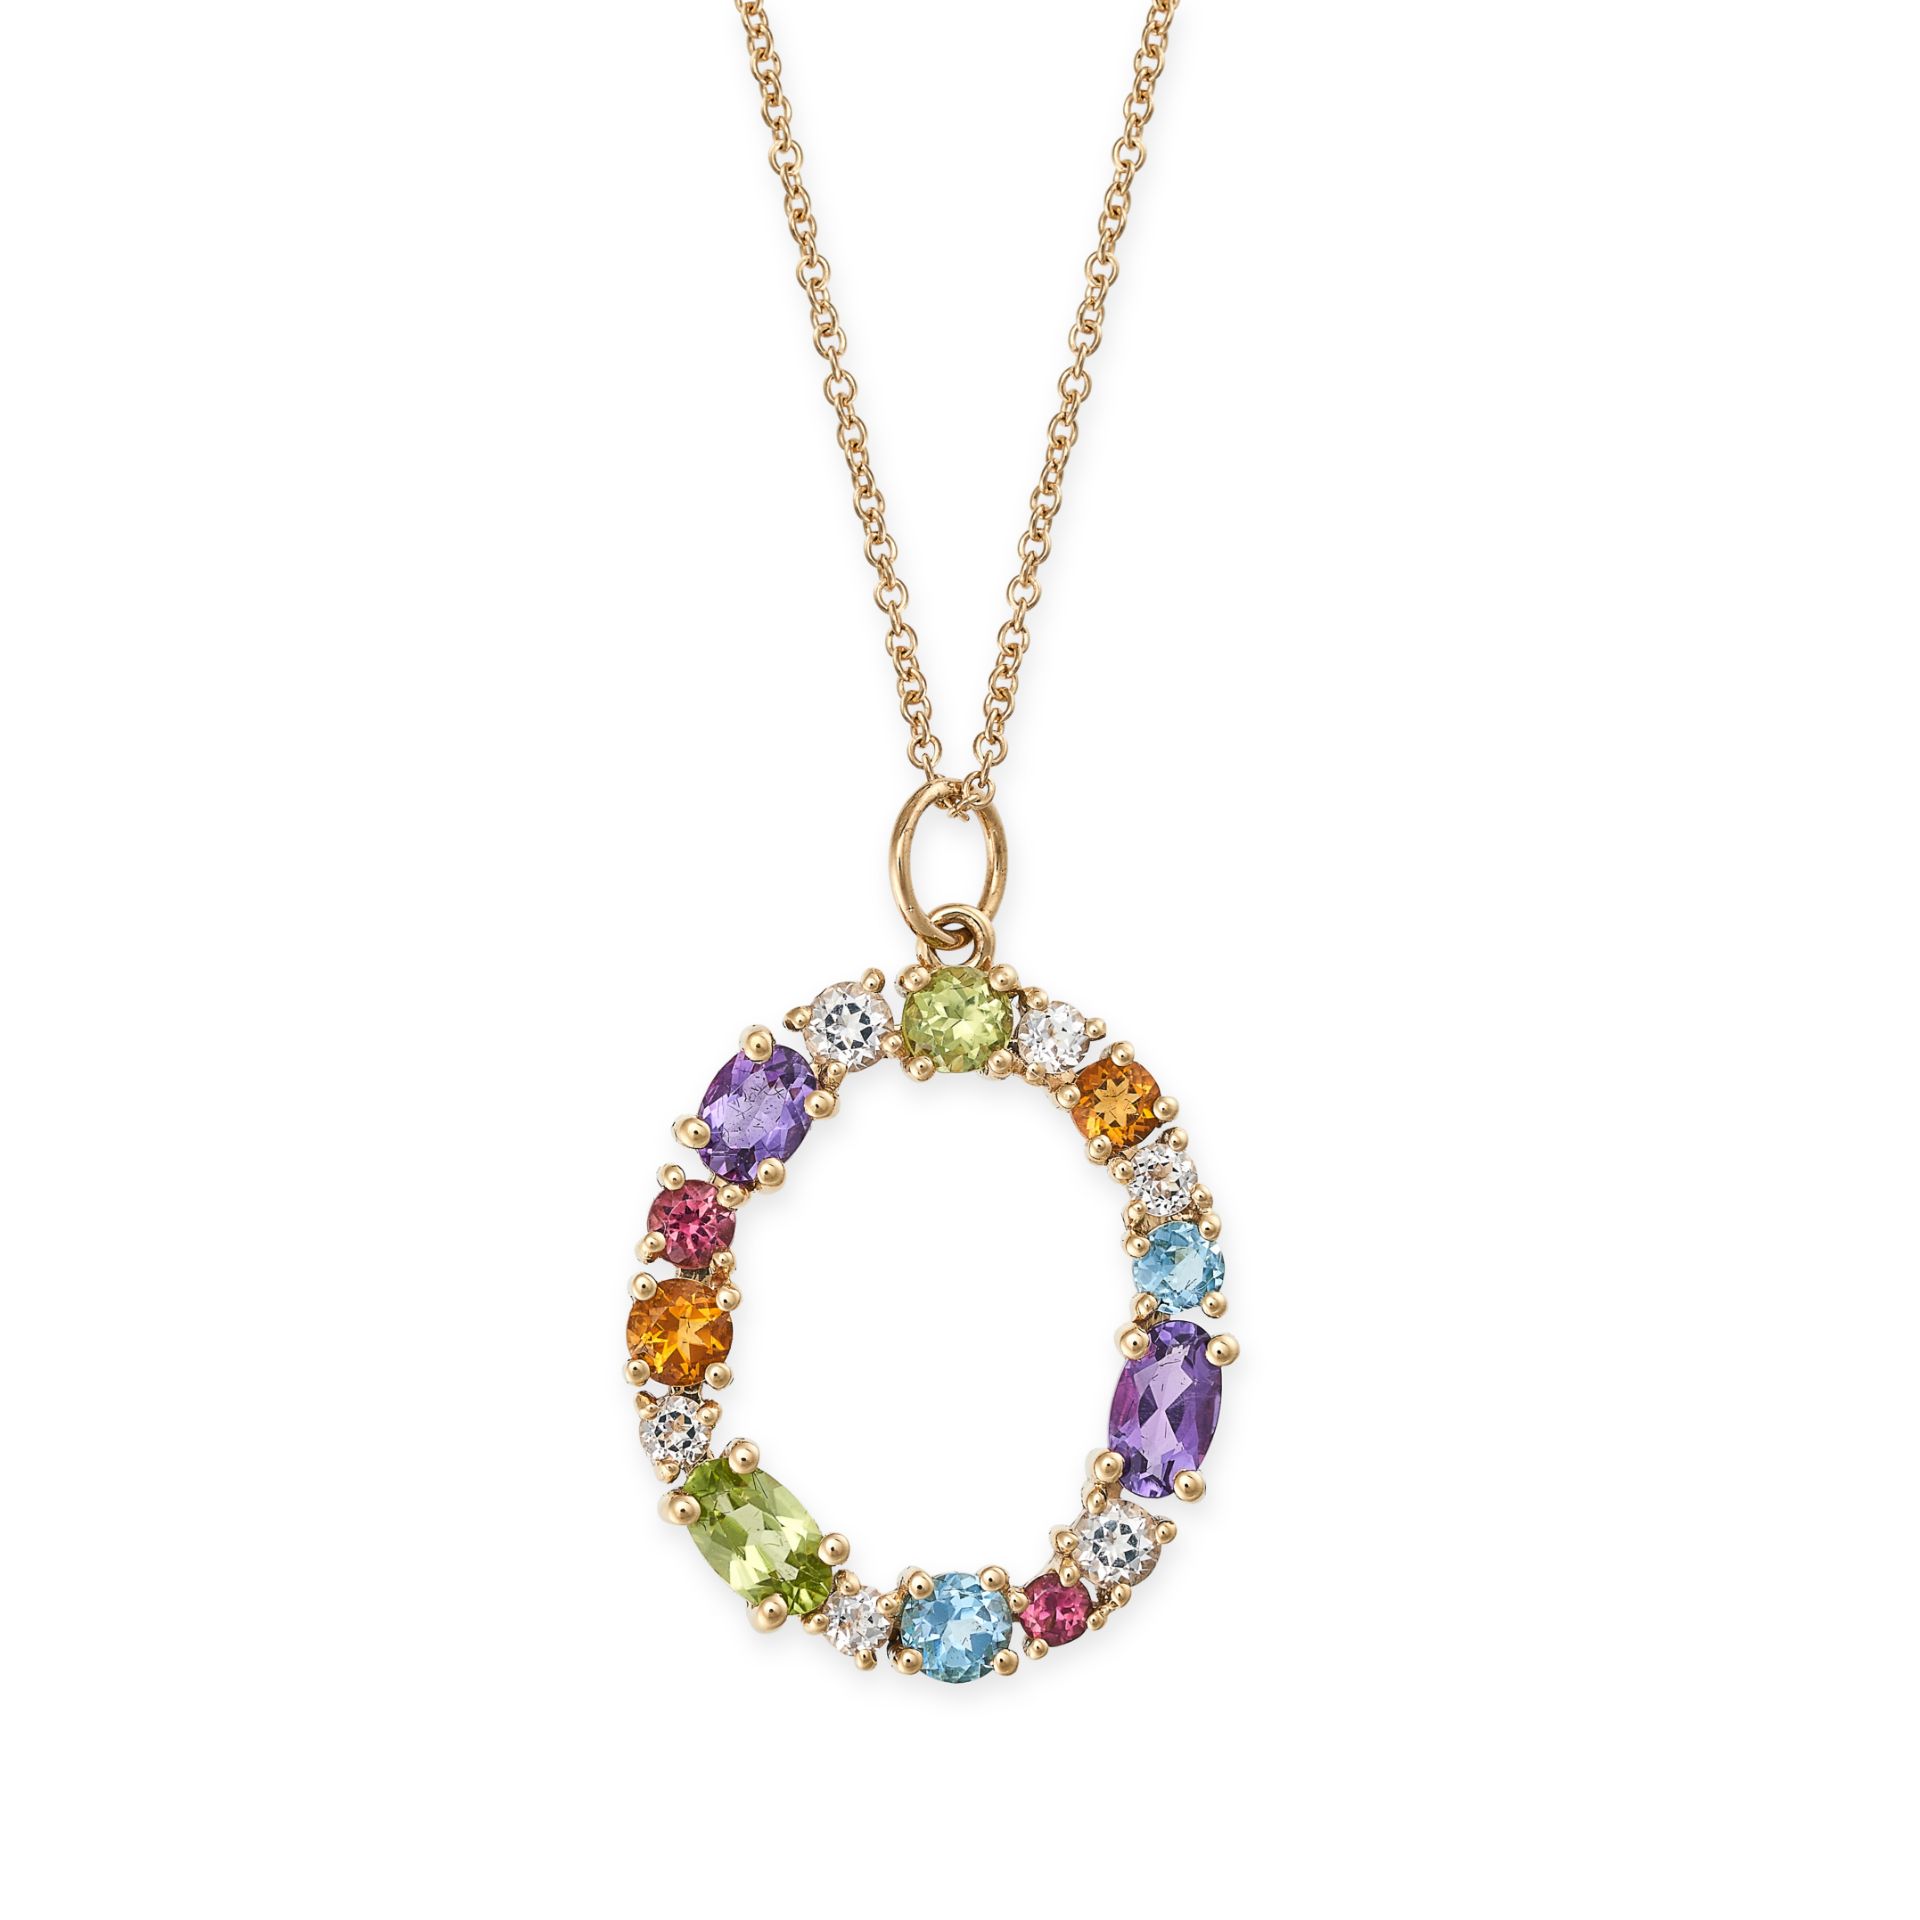 A MULTI GEM PENDANT NECKLACE in 18ct yellow gold, the pendant designed as an open circle set with...